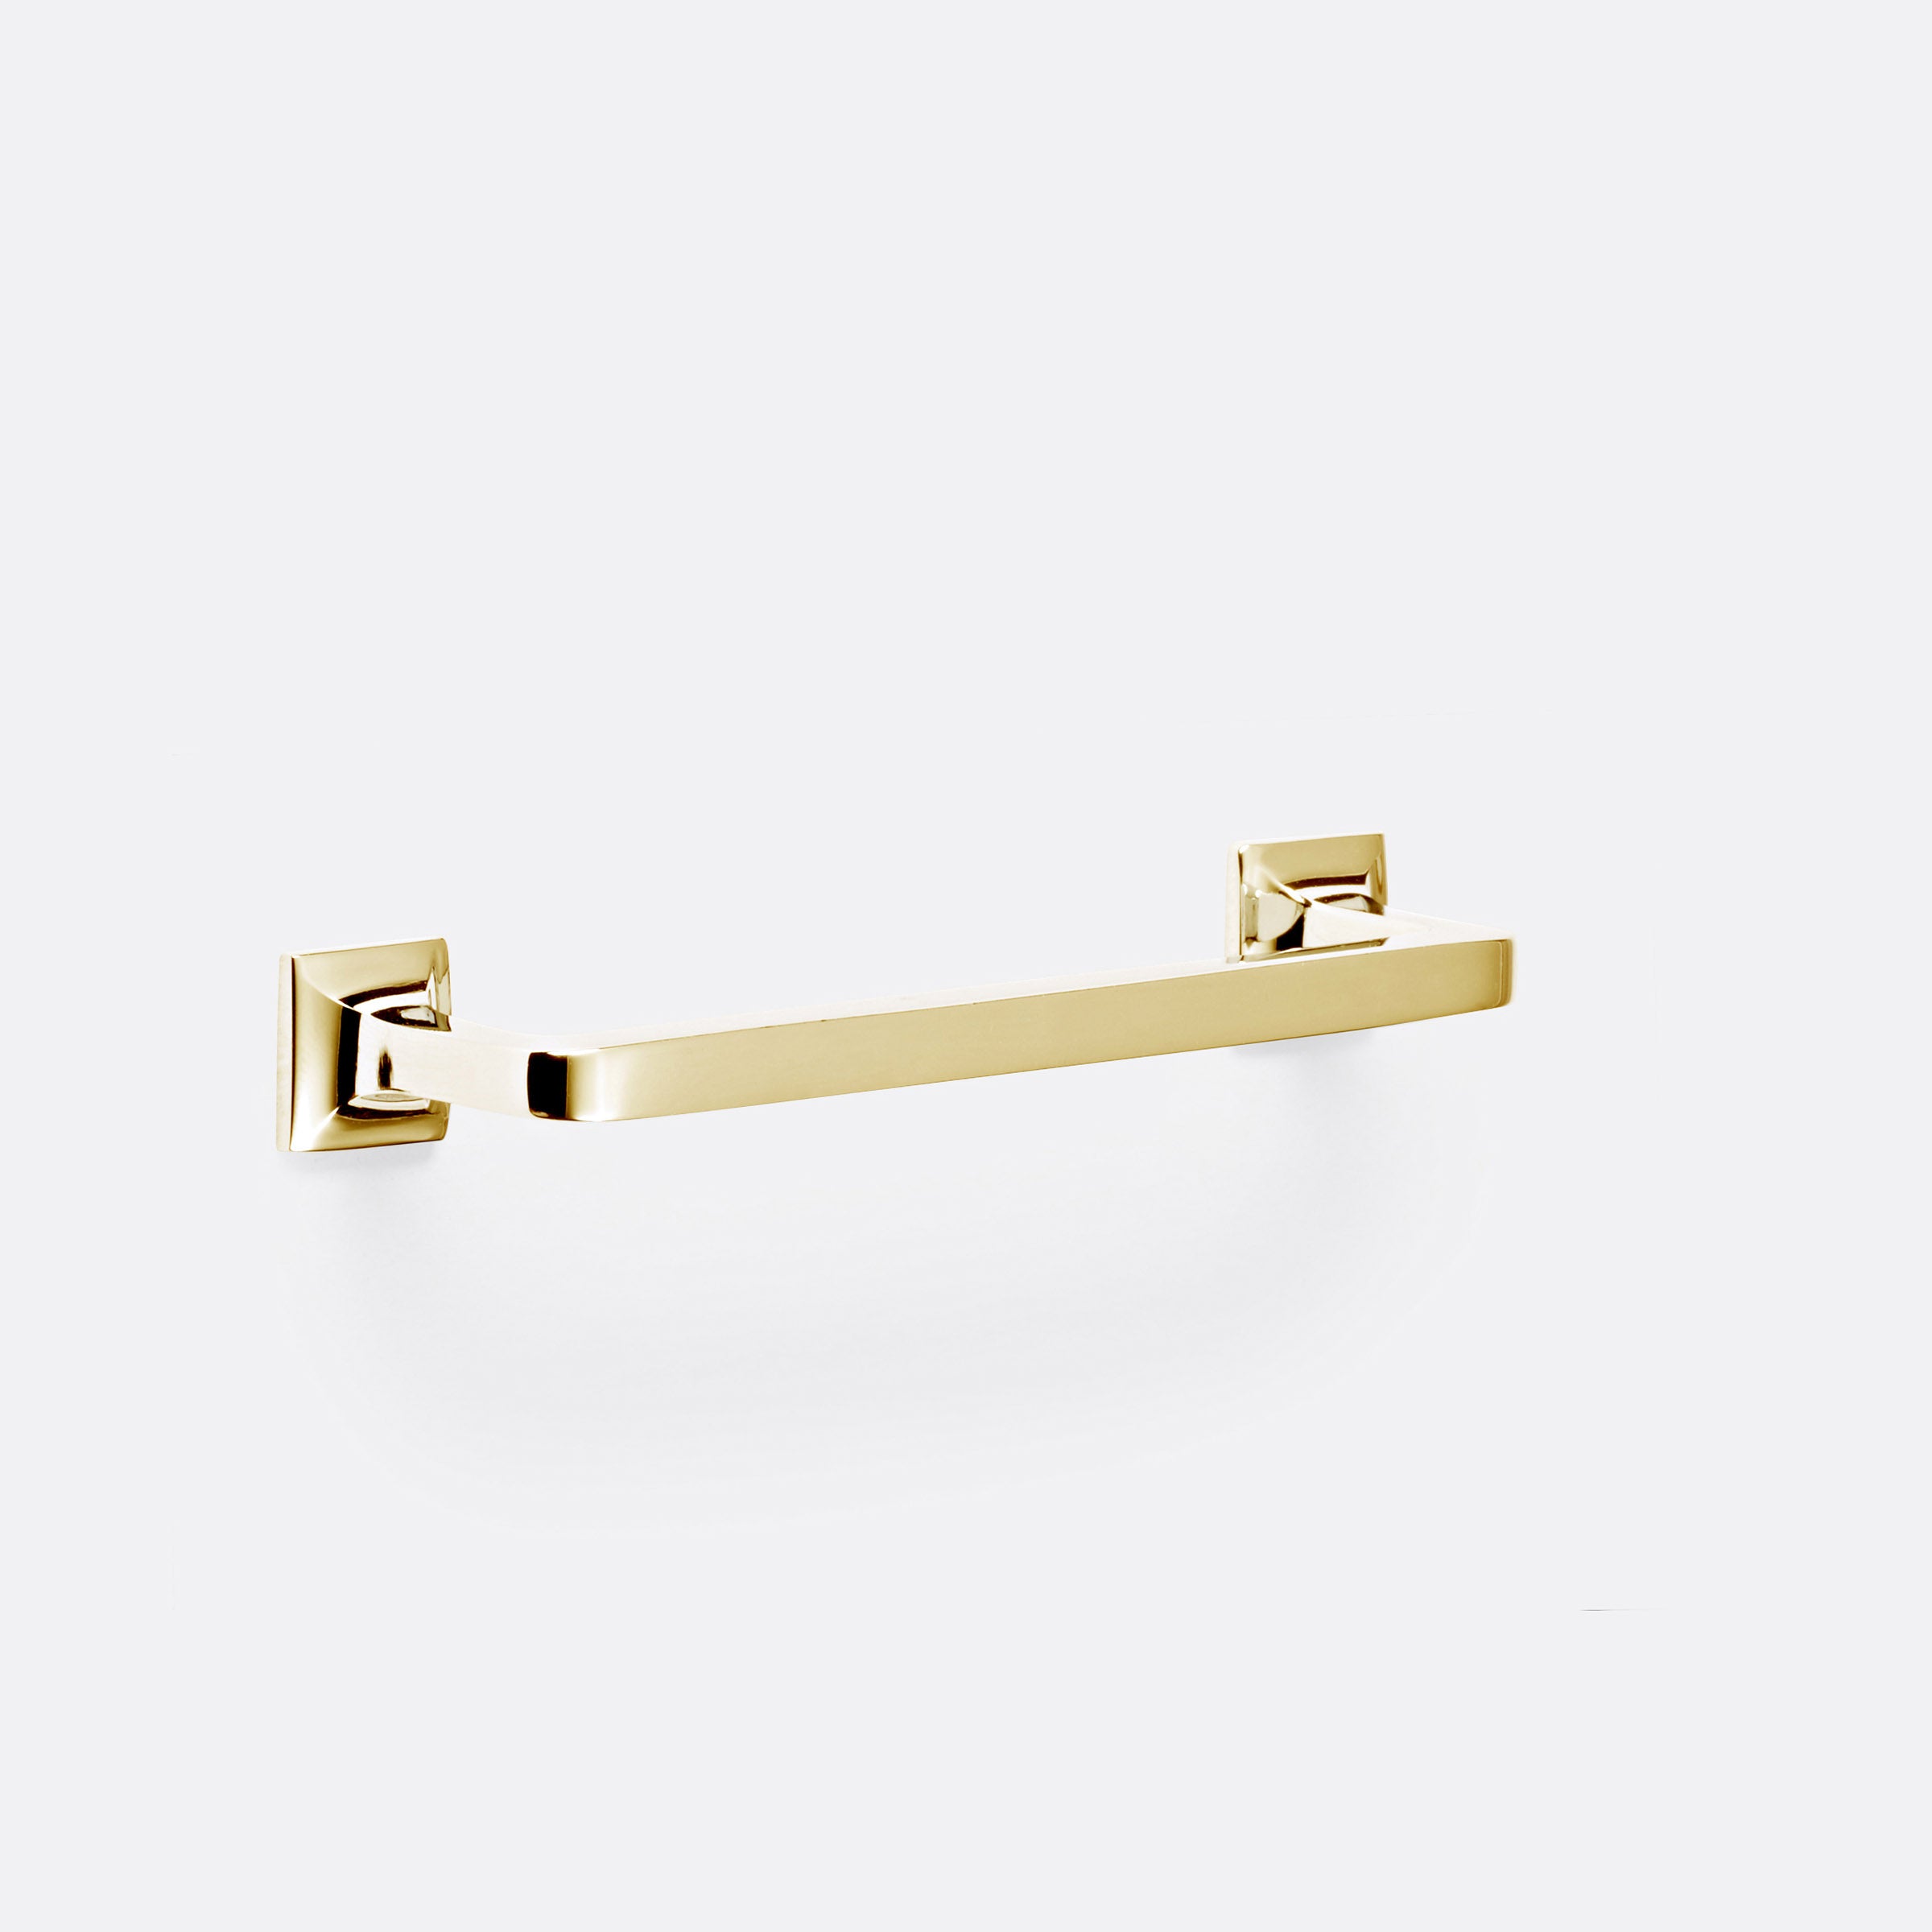 Mission Drawer Pull by Rejuvenation 4" / Unlacquered Brass